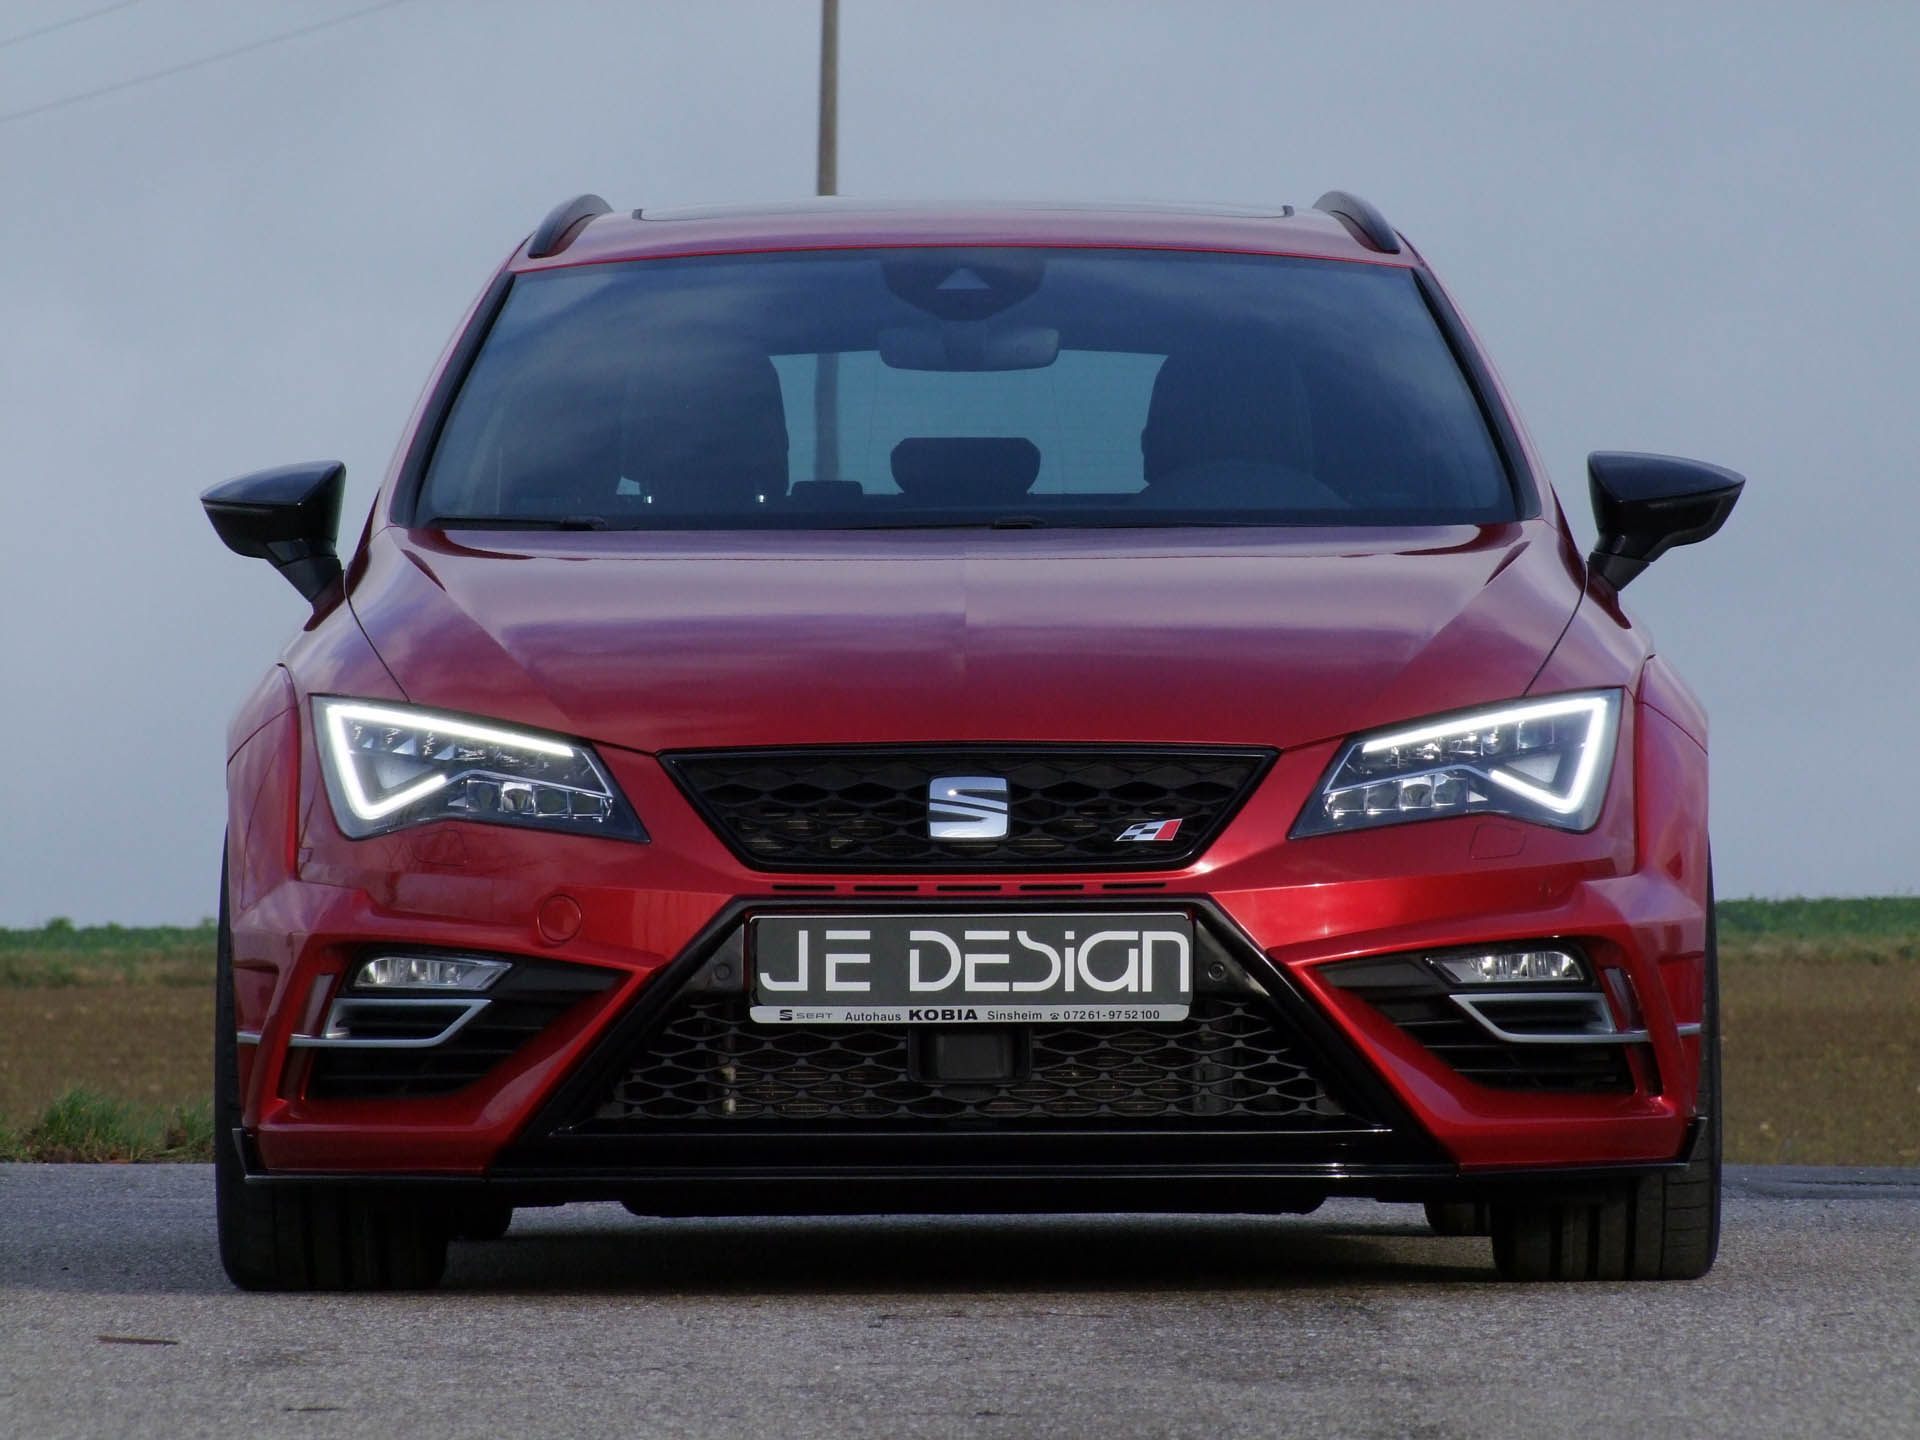 Check our price and buy JE Design body kit for Seat Leon ST FR + Cupra!